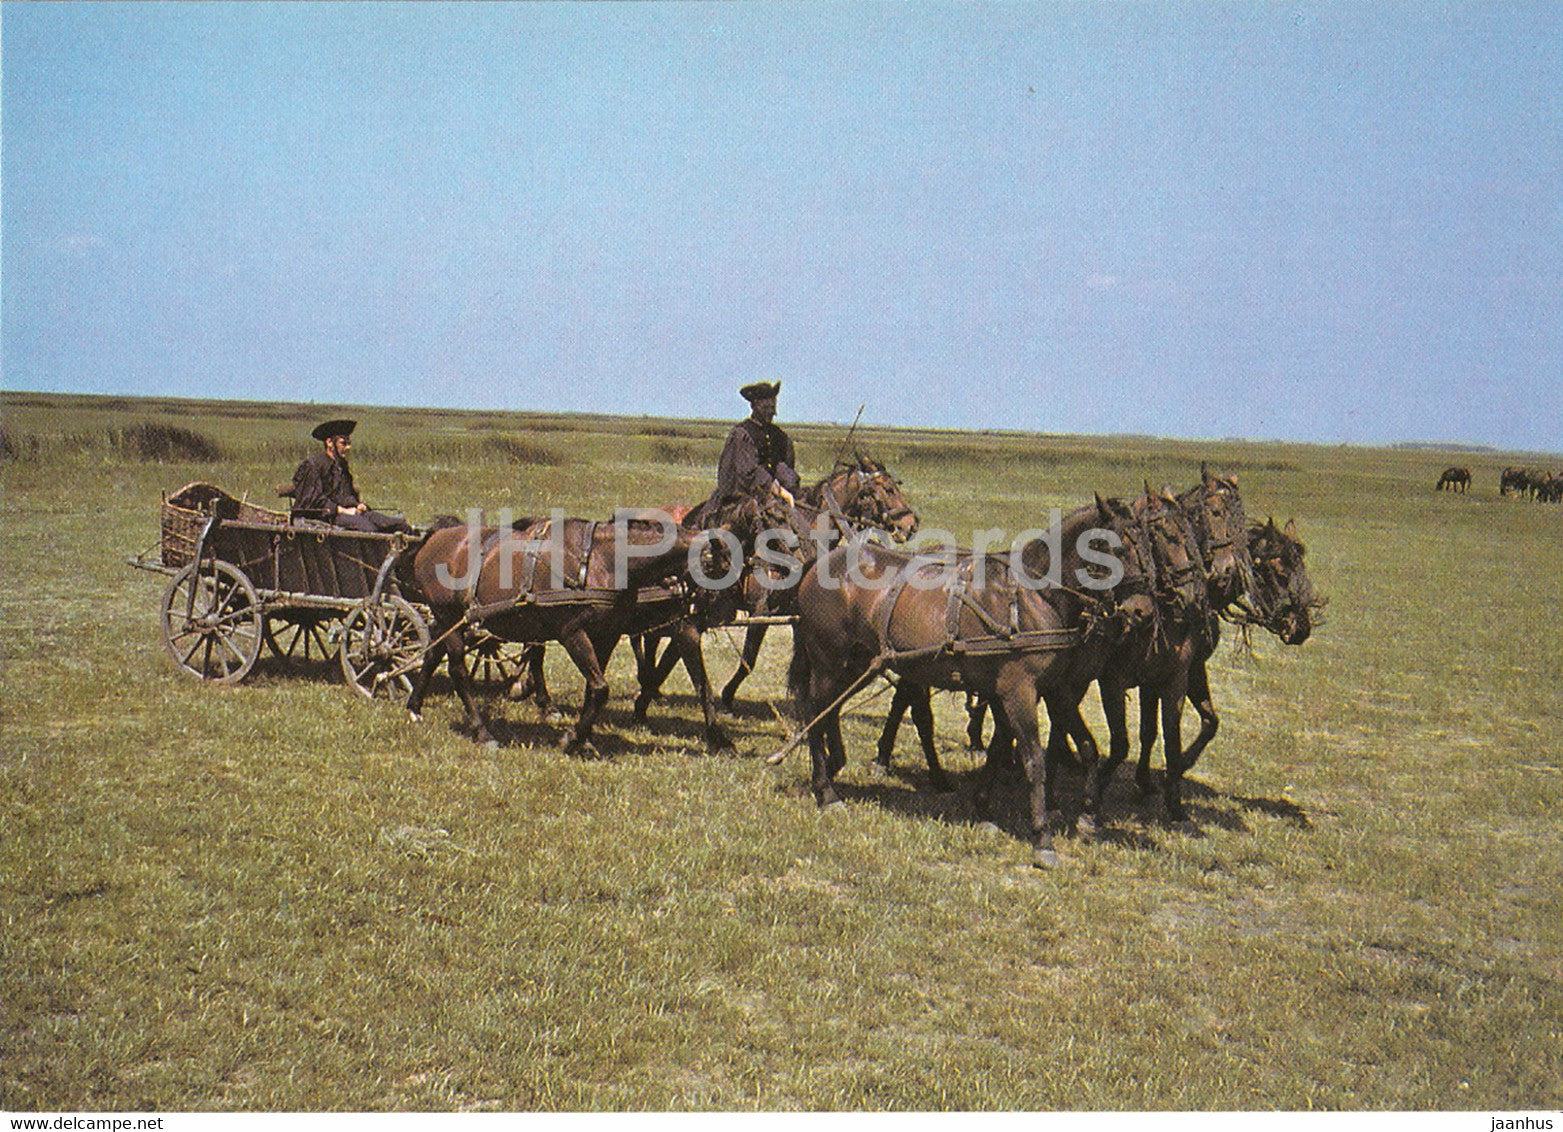 Hortobagy - Seven in Hand - horse carriage - Hungary - unused - JH Postcards